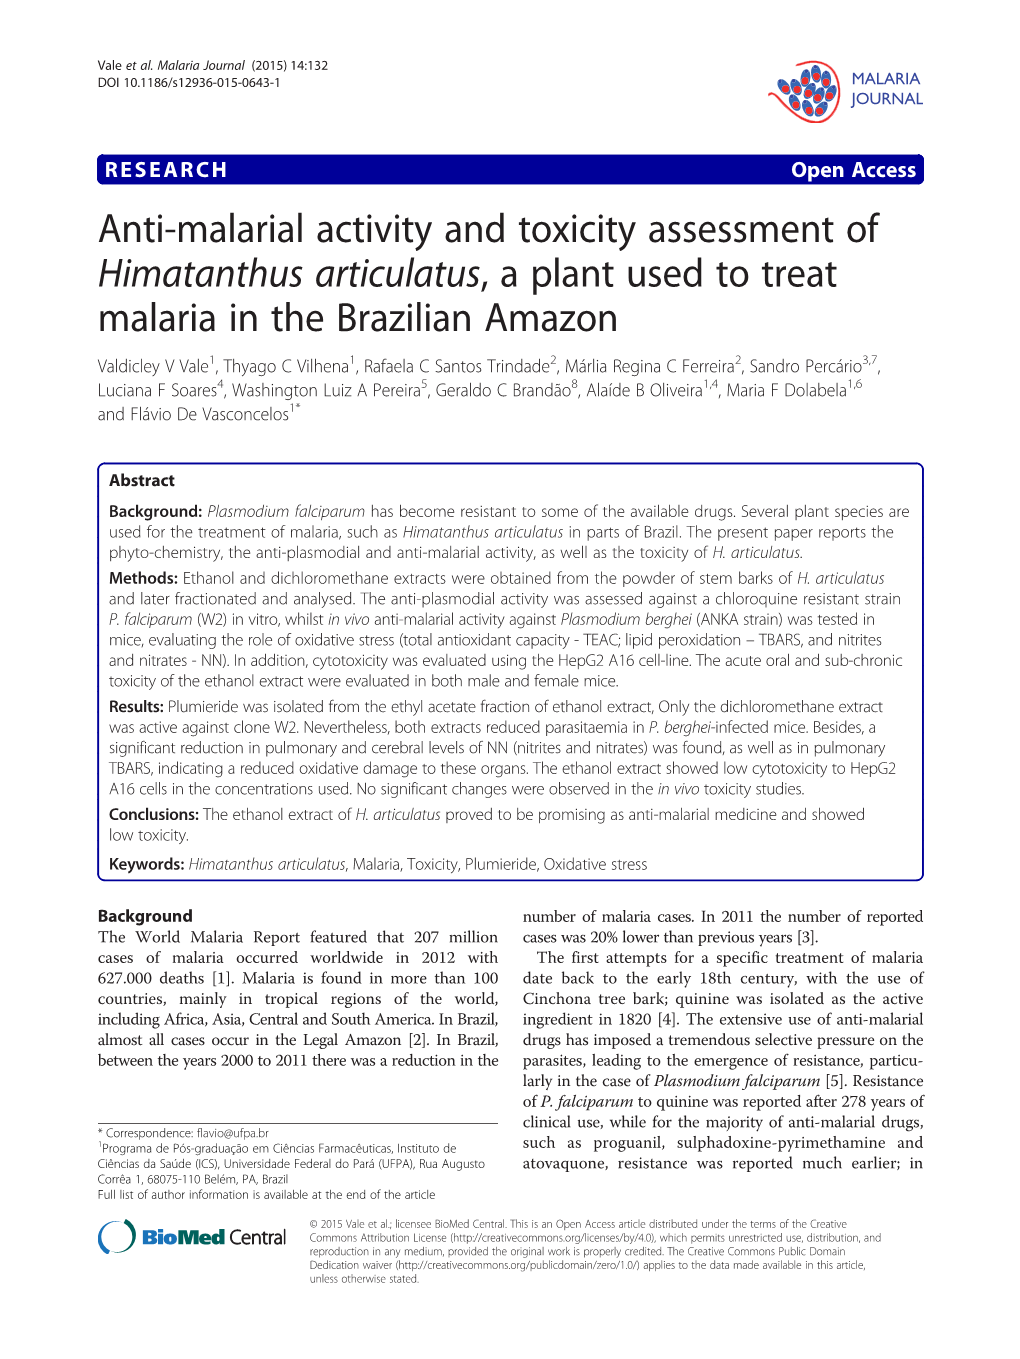 Anti-Malarial Activity and Toxicity Assessment of Himatanthus